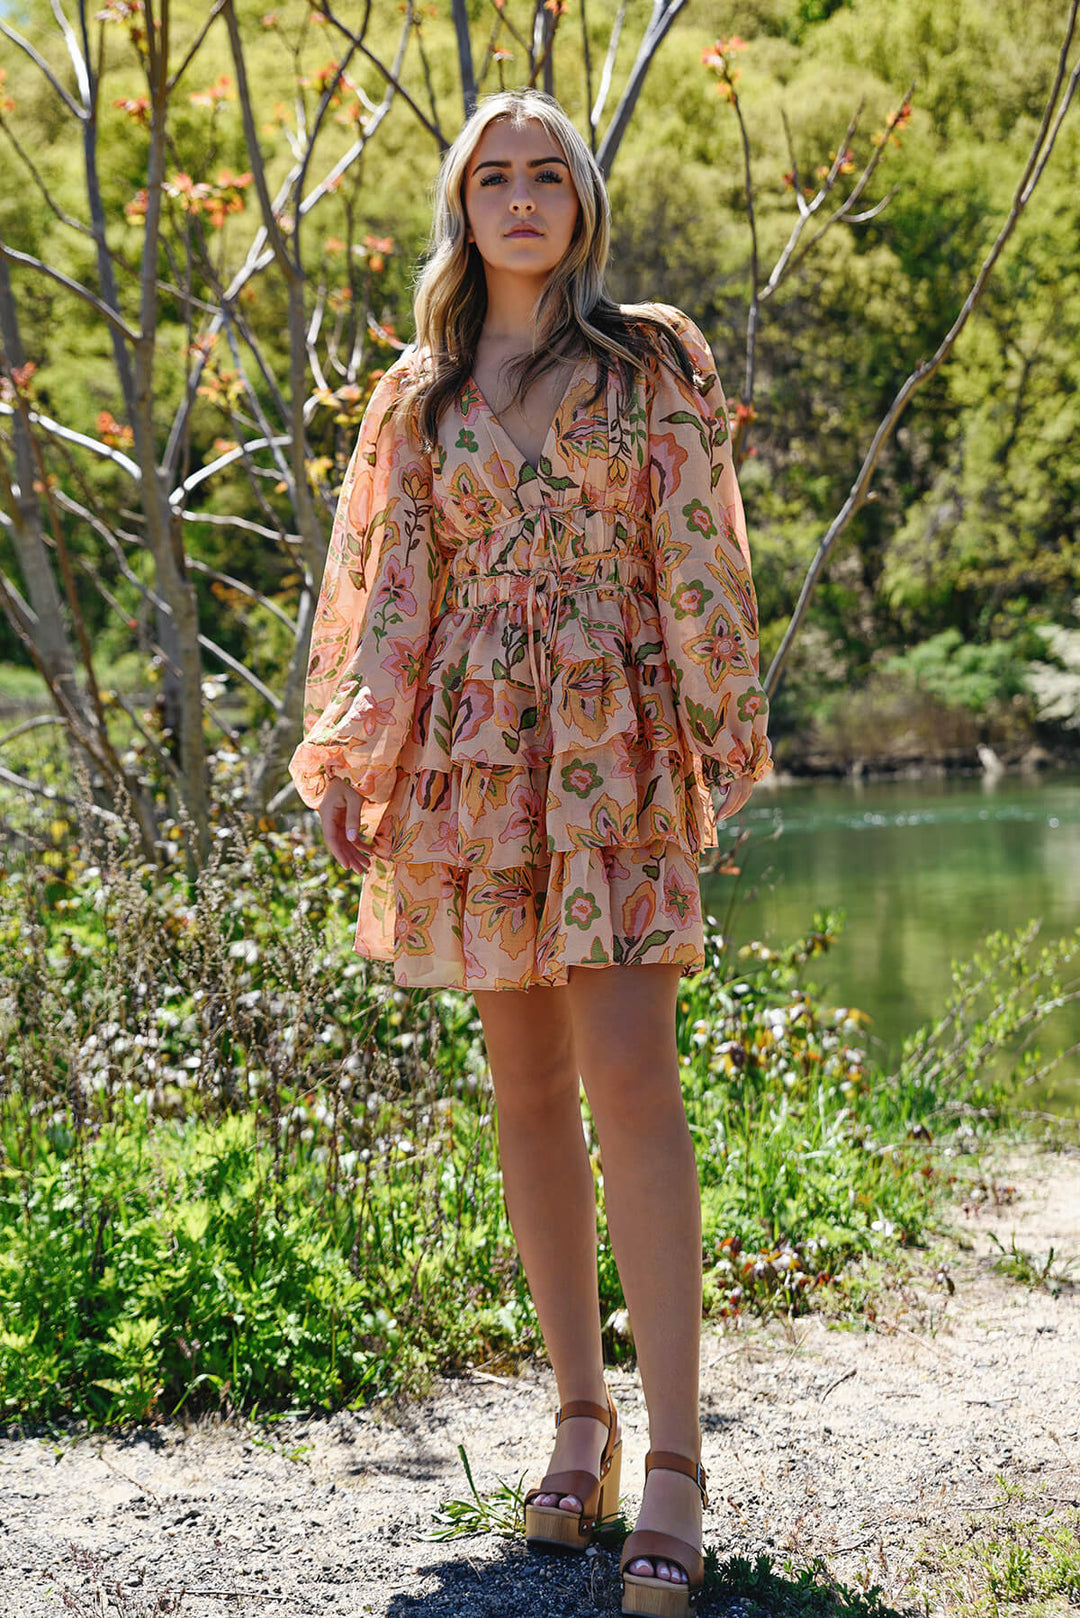 A lady stands next to a lake in a long sleeved min dress with a tiered skirt and floral print.